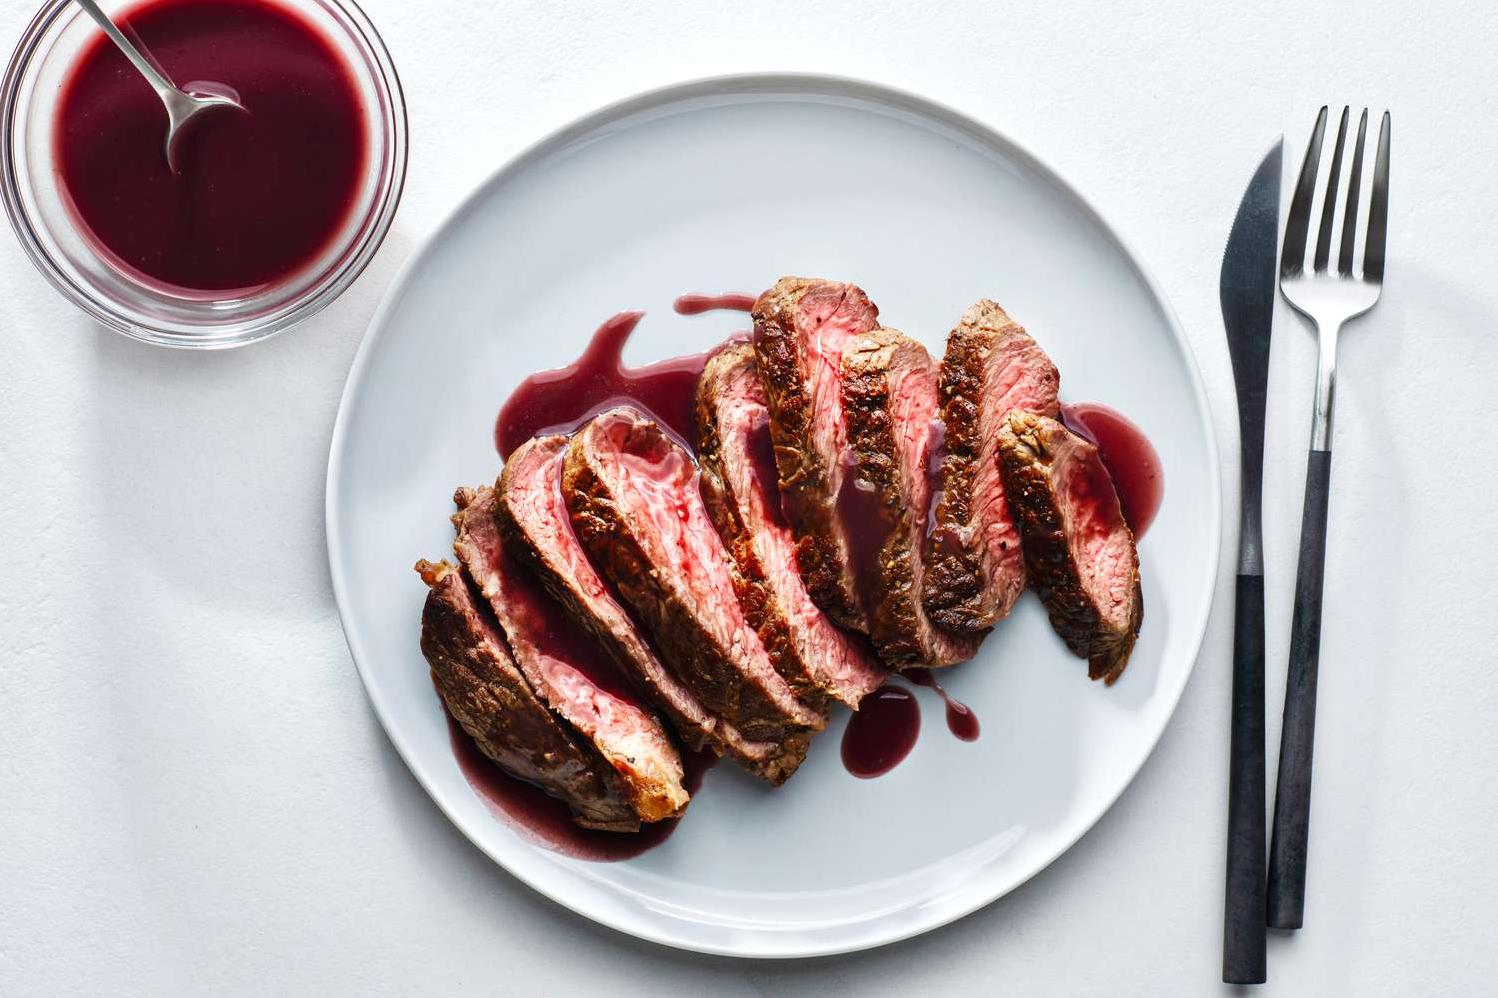  Add a pop of color and flavor to your beef dish with this vibrant red wine sauce.